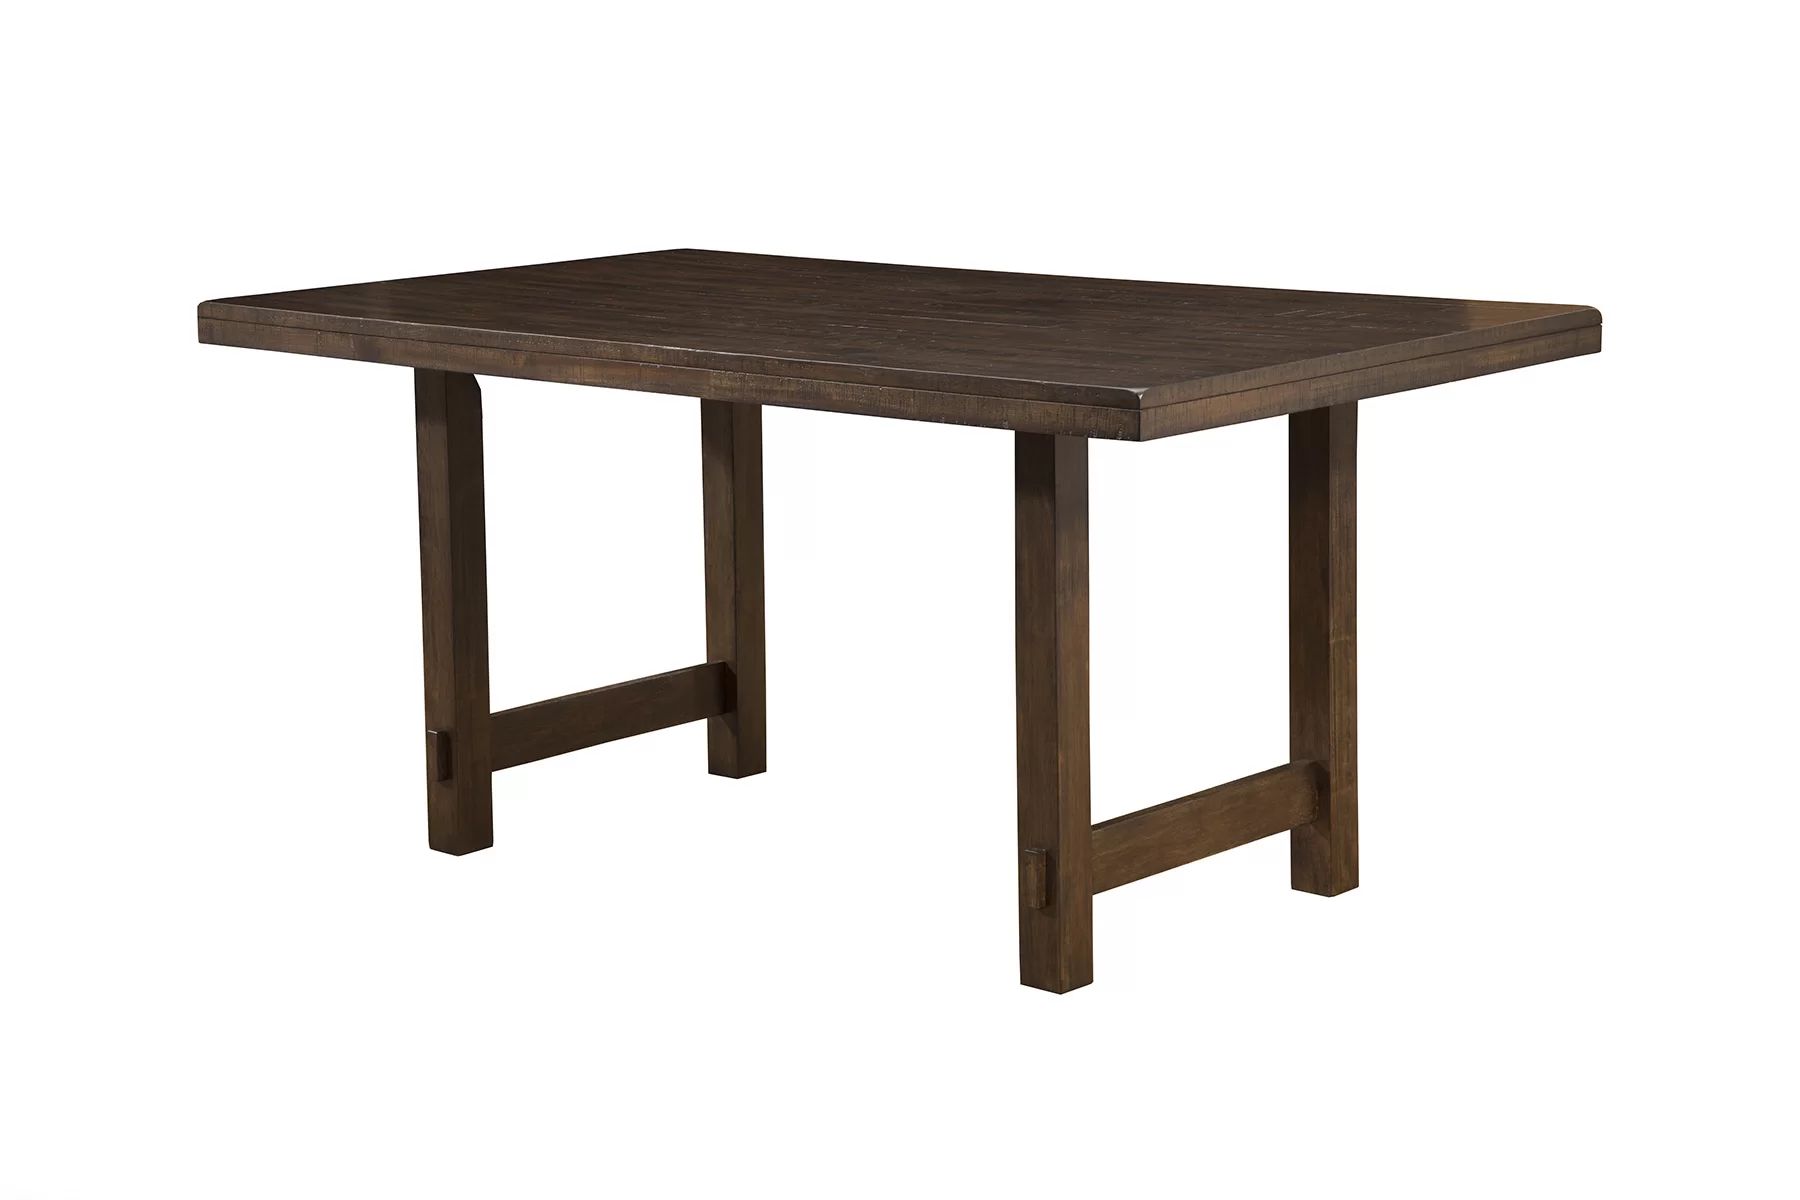 Channel Island Solid Wood Dining Table | Wayfair Professional